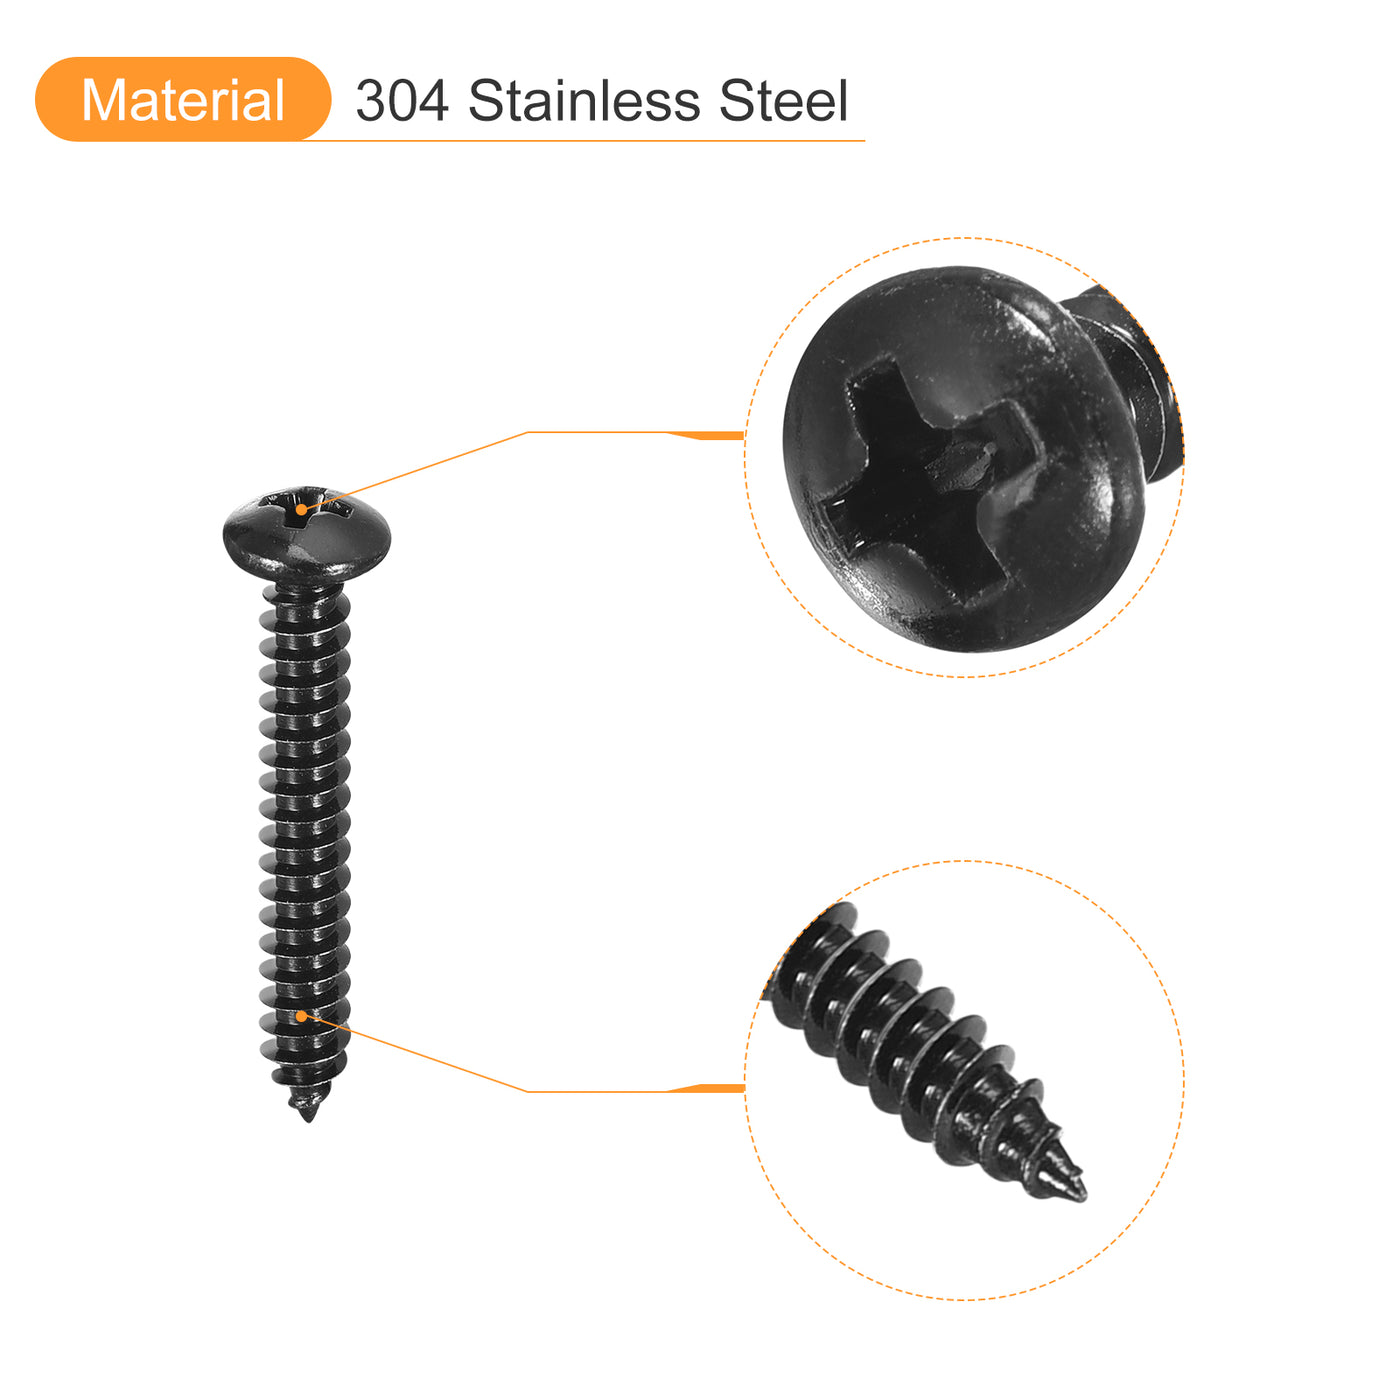 uxcell Uxcell 5mm x 35mm Phillips Pan Head Self-tapping Screw, 50pcs - 304 Stainless Steel Round Head Wood Screw Full Thread (Black)